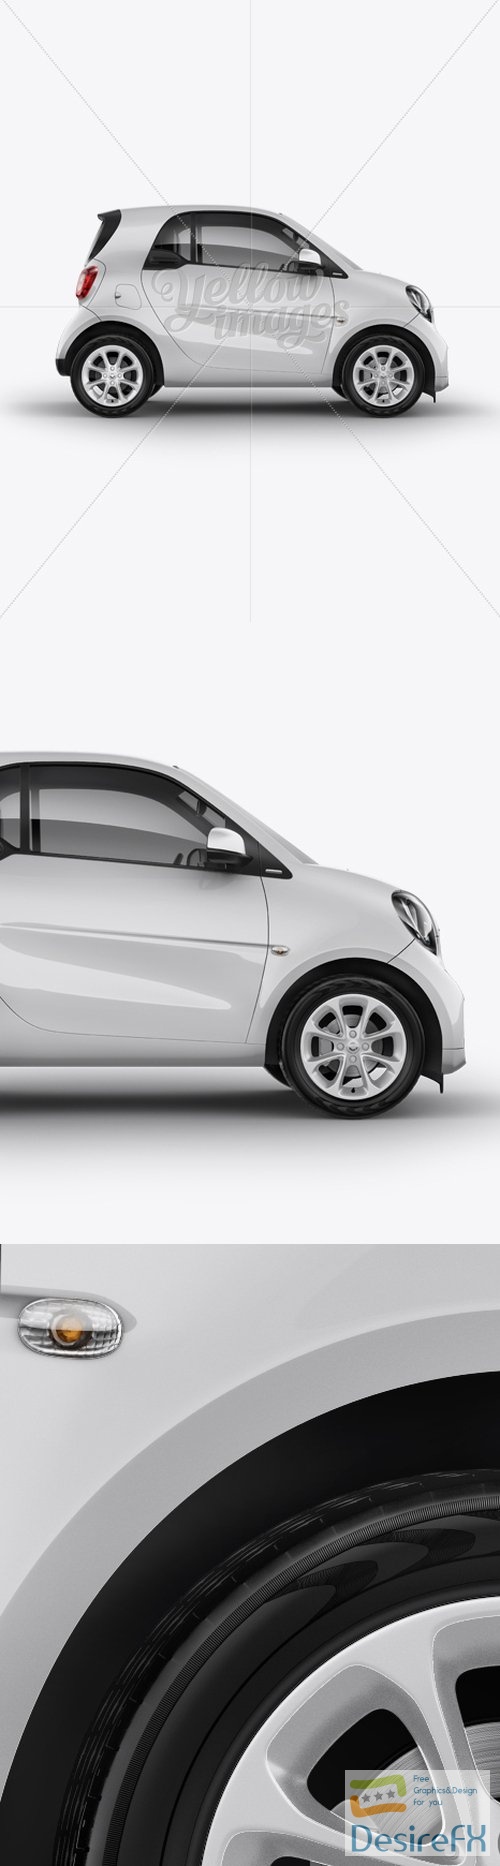 Smart Fortwo Mockup - Side View 14045